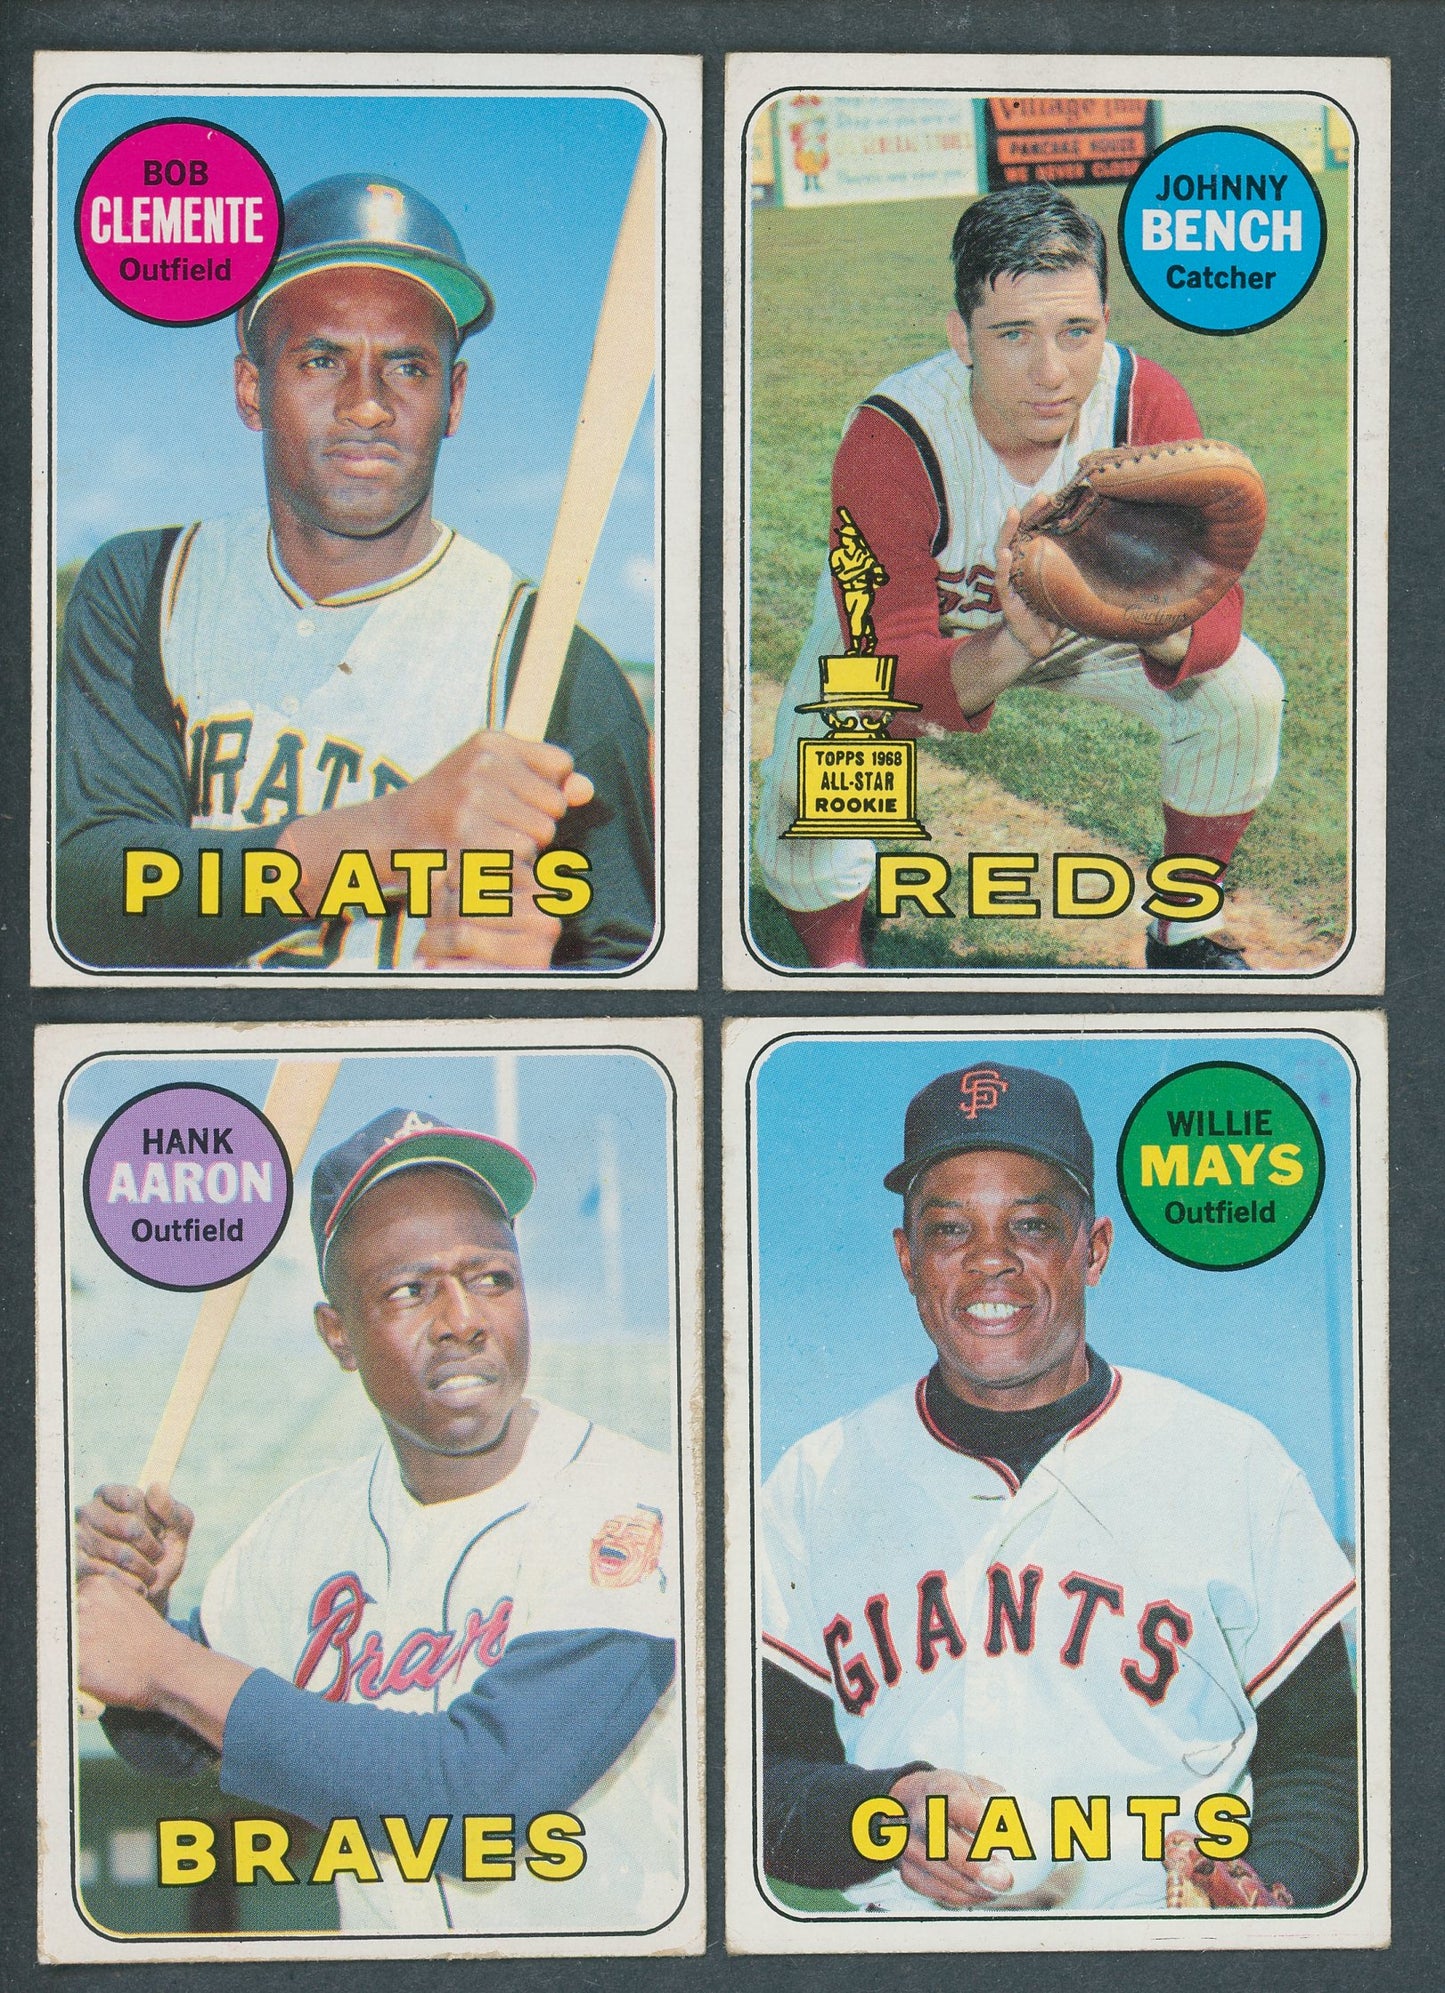 1969 Topps Baseball Complete Set (664) (Condition - Read) (#3)